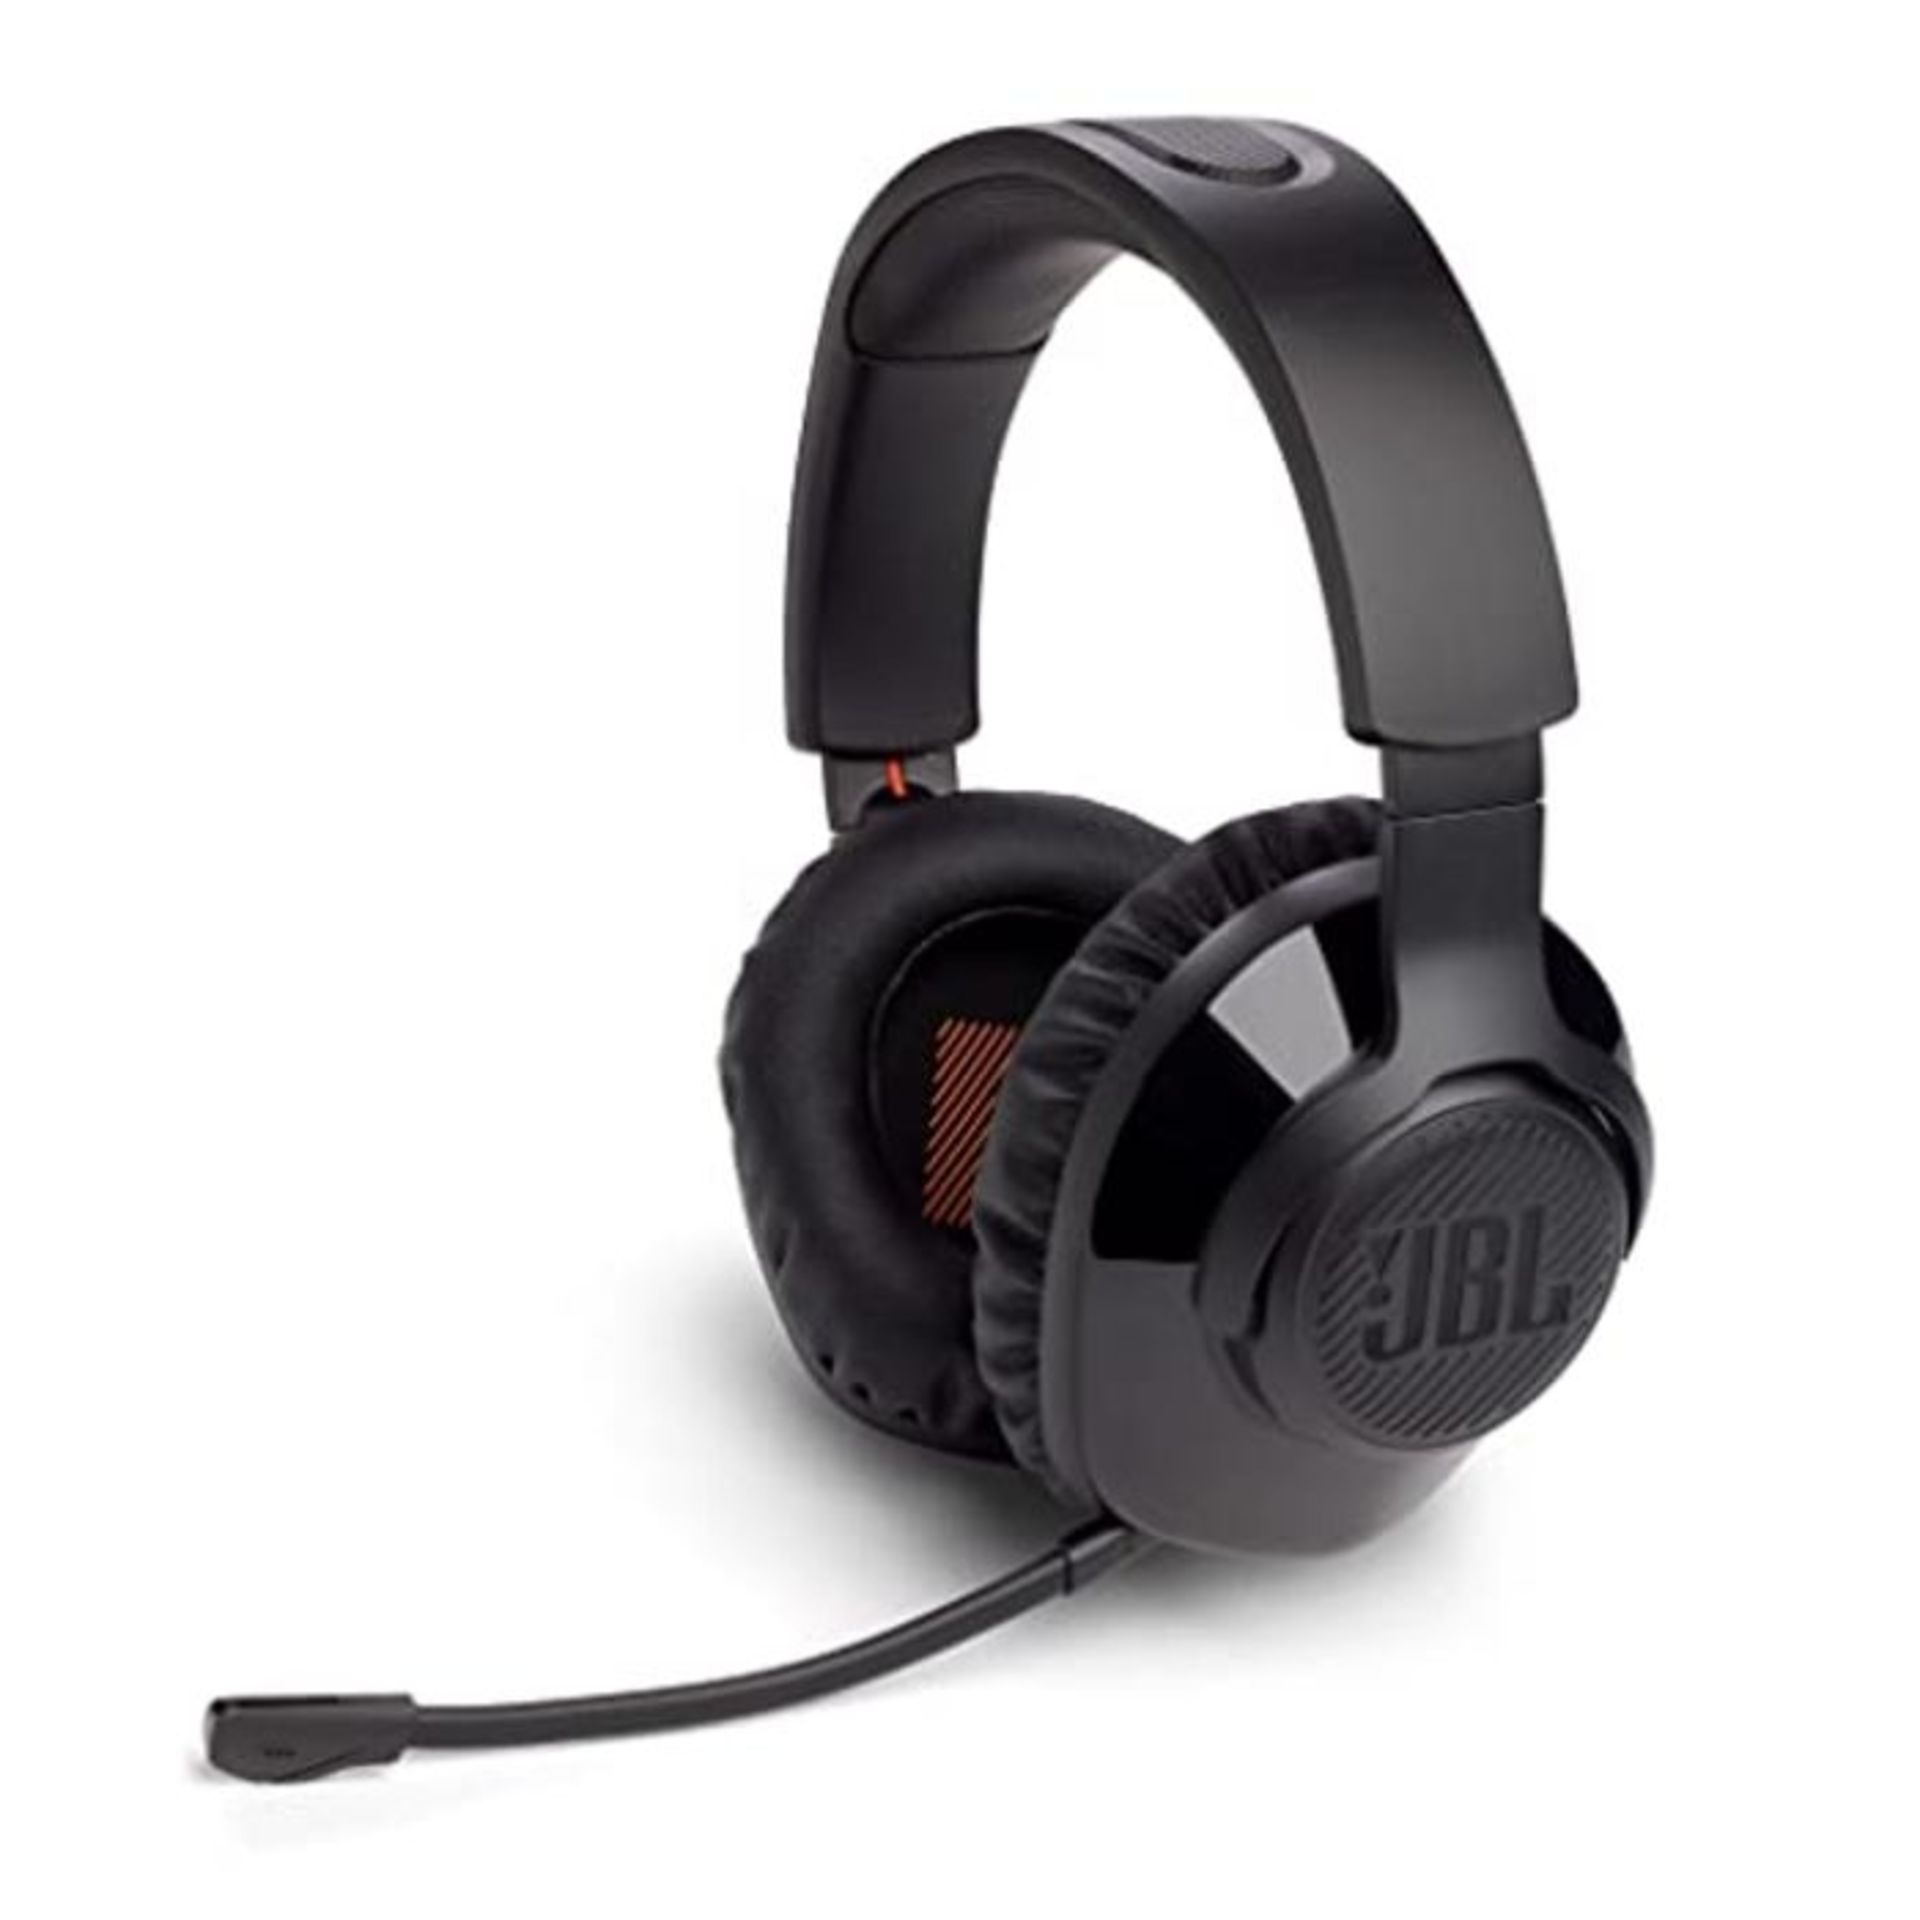 RRP £69.00 JBL QUANTUM 350 WIRELESS Gaming Headset with Boom Mic, Adjustable Headband and USB Con